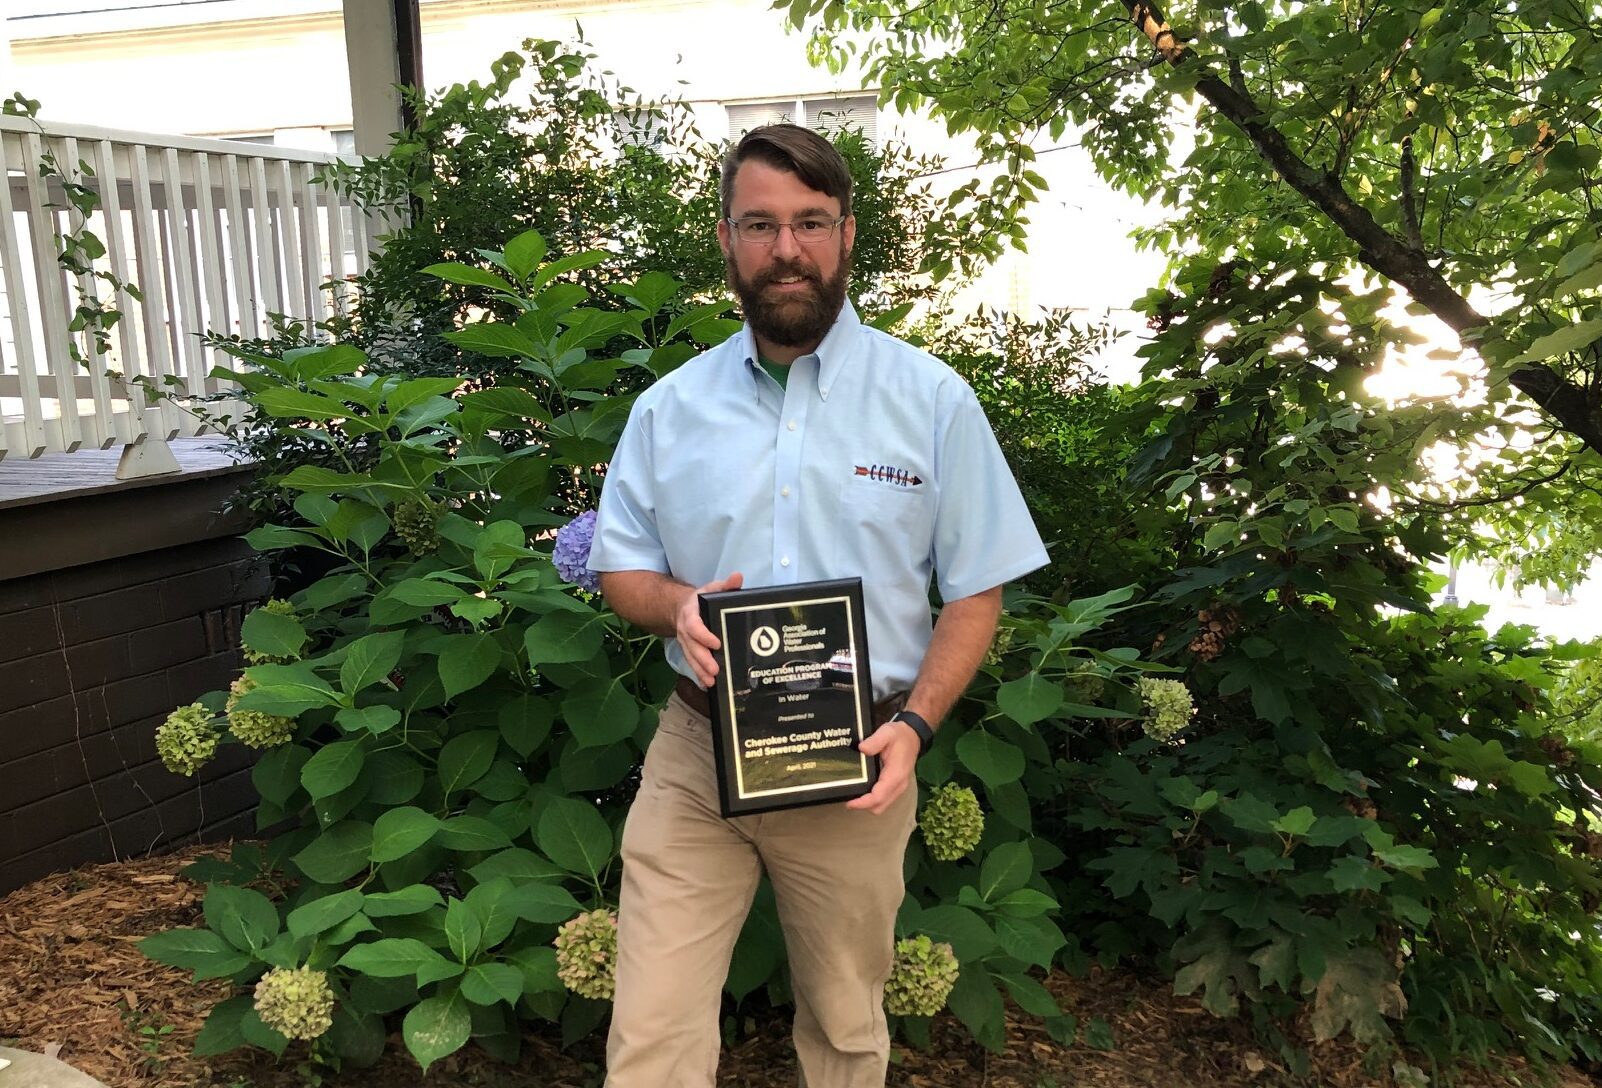 The CCWSA Education Program received the Excellence in Water Education award!  Our Education Team is committed to providing tools on how to protect and use water wisely!  Congratulations to the CCWSA team for all their effort!